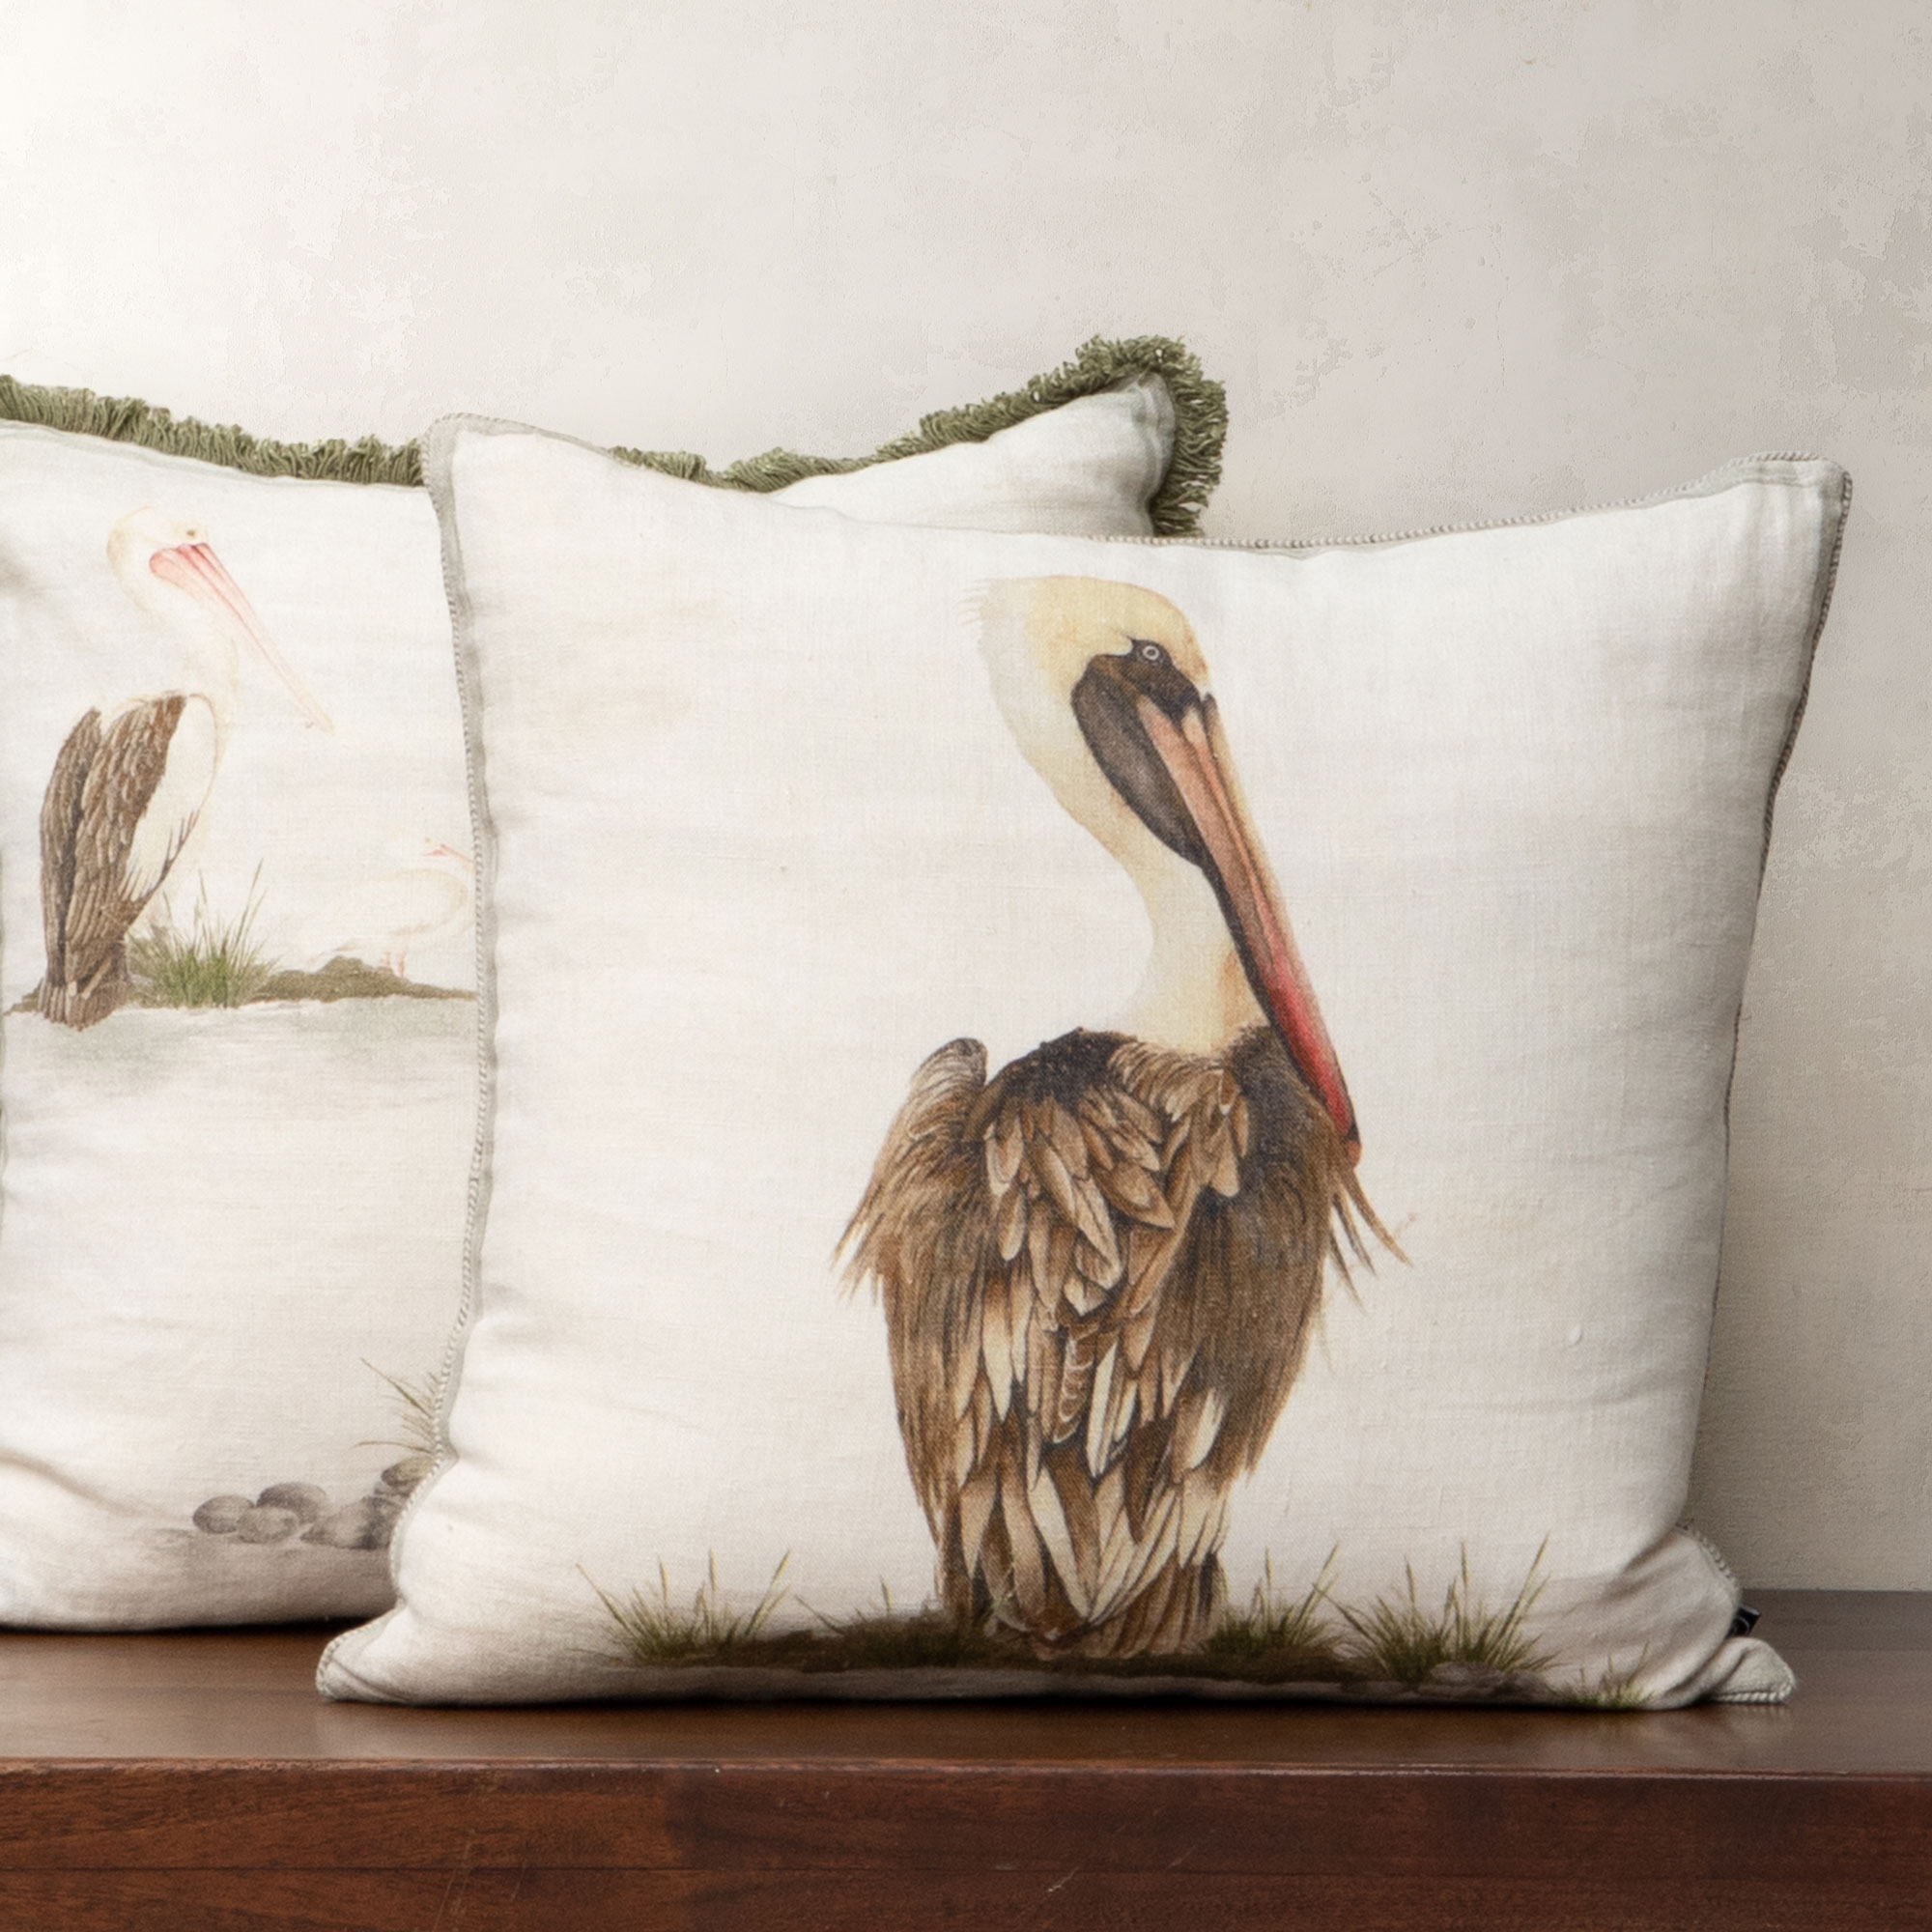 Perched Pelican Cushion Cover